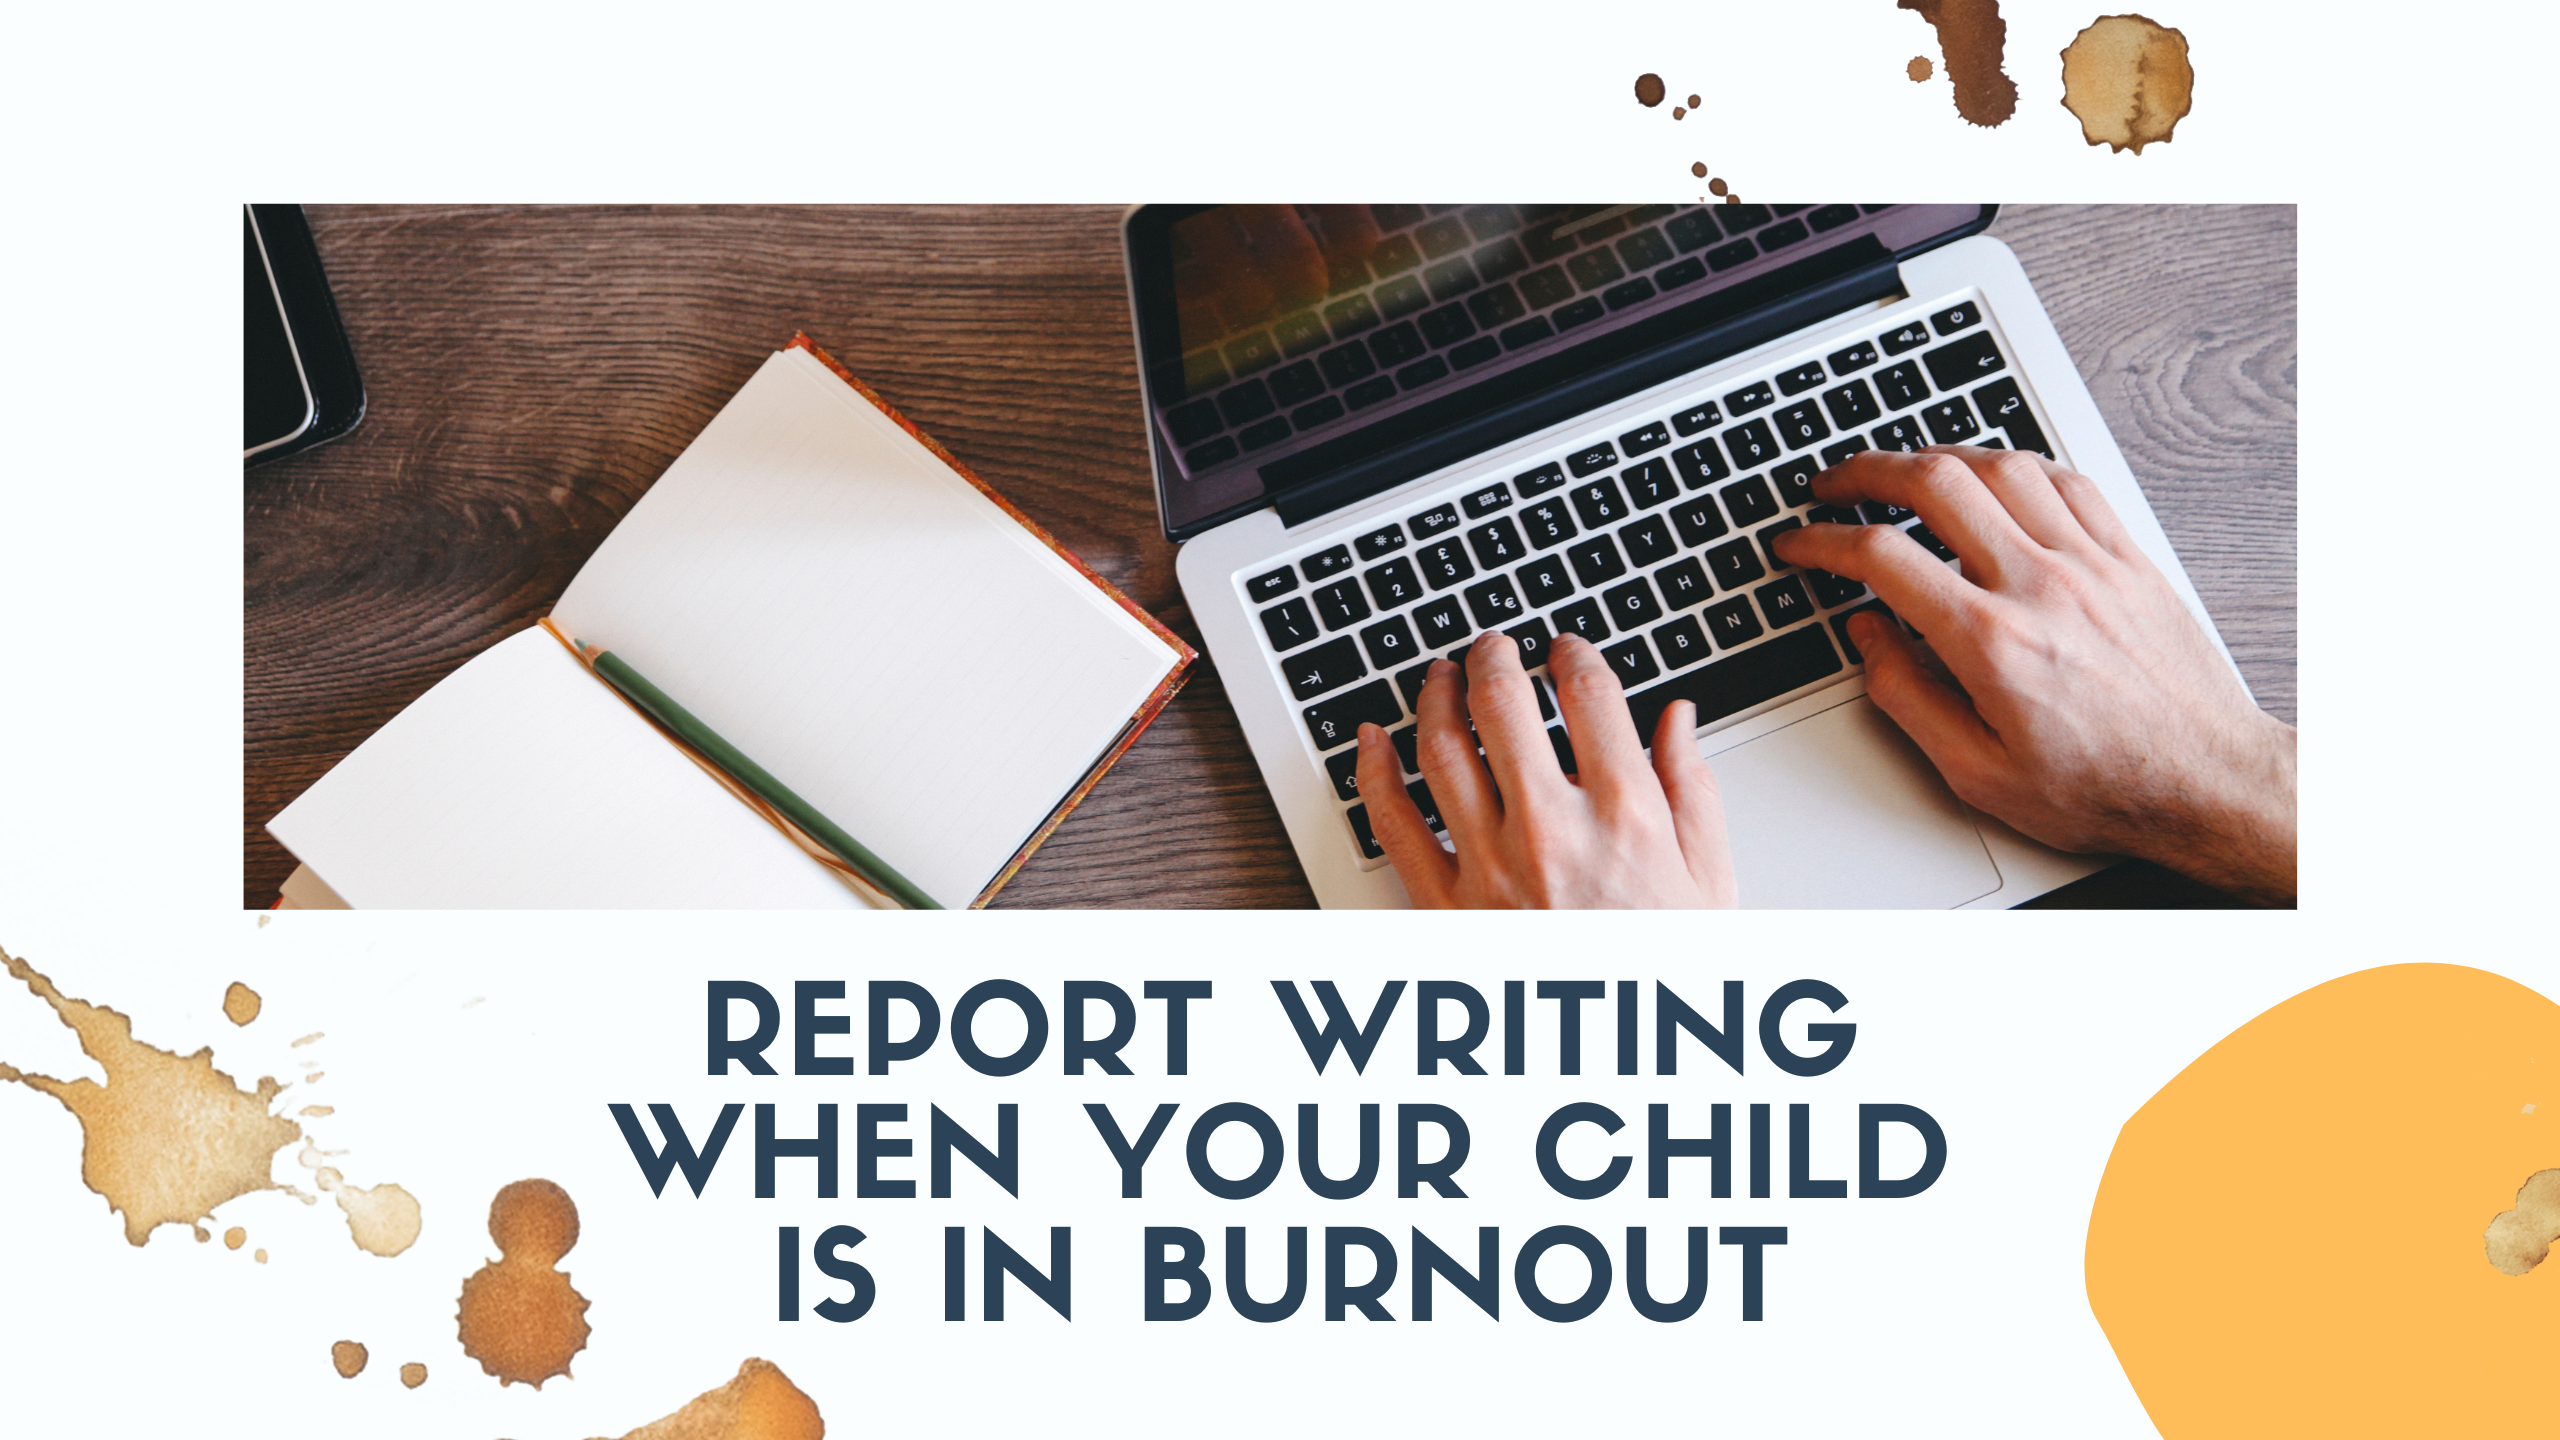 Report Writing When Your Child is in Burnout